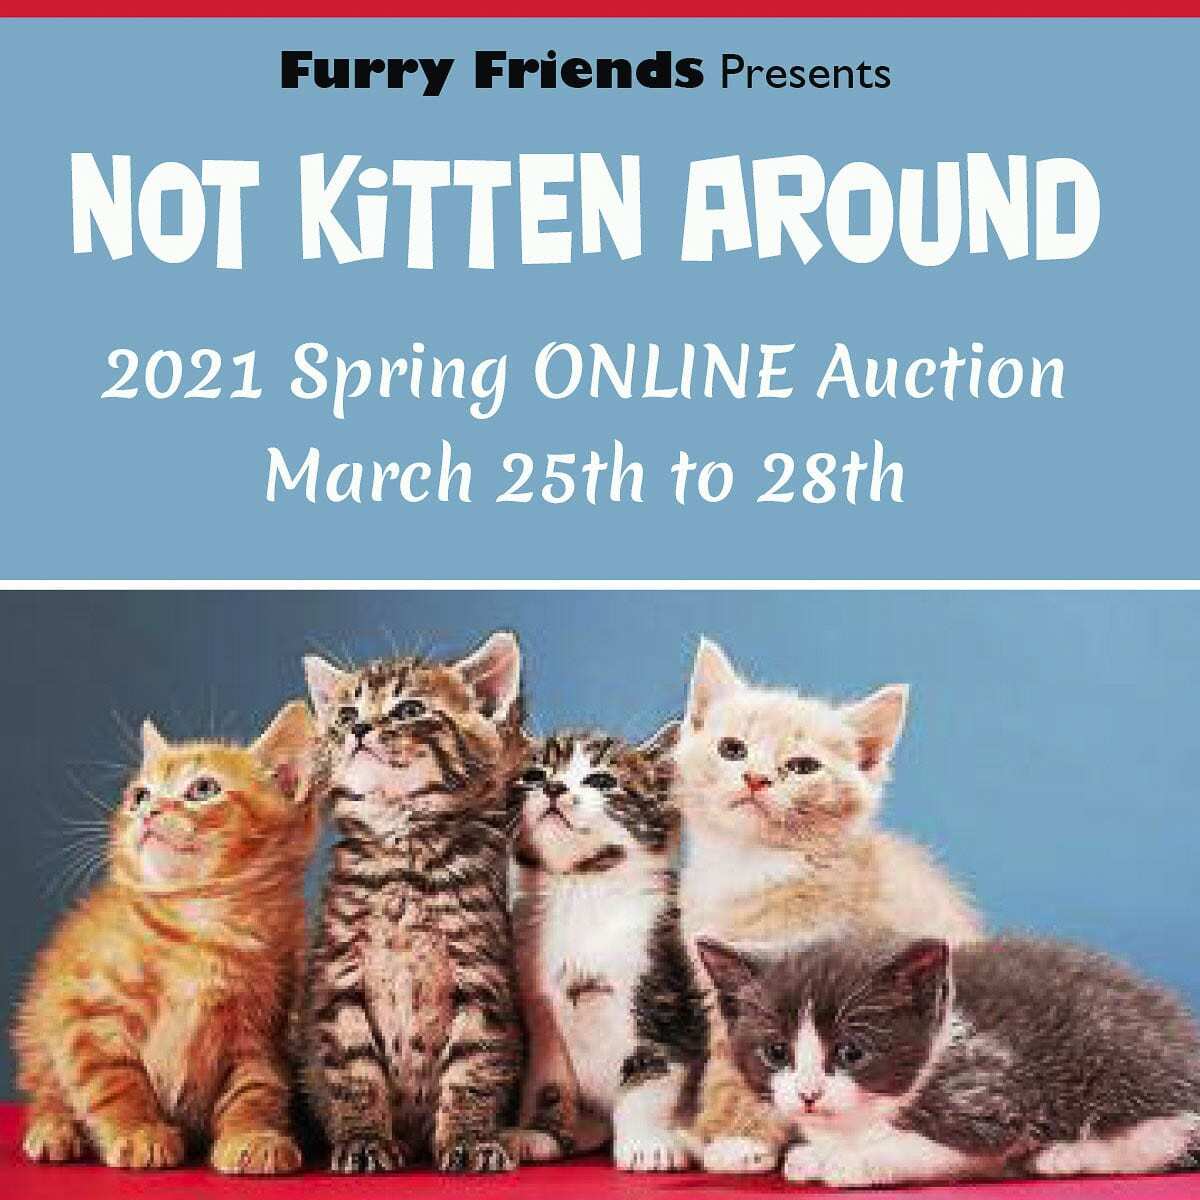 The auction’s name ‘Not Kitten Around’ is to bring attention to Kitten Season. Photo courtesy of Furry Friends